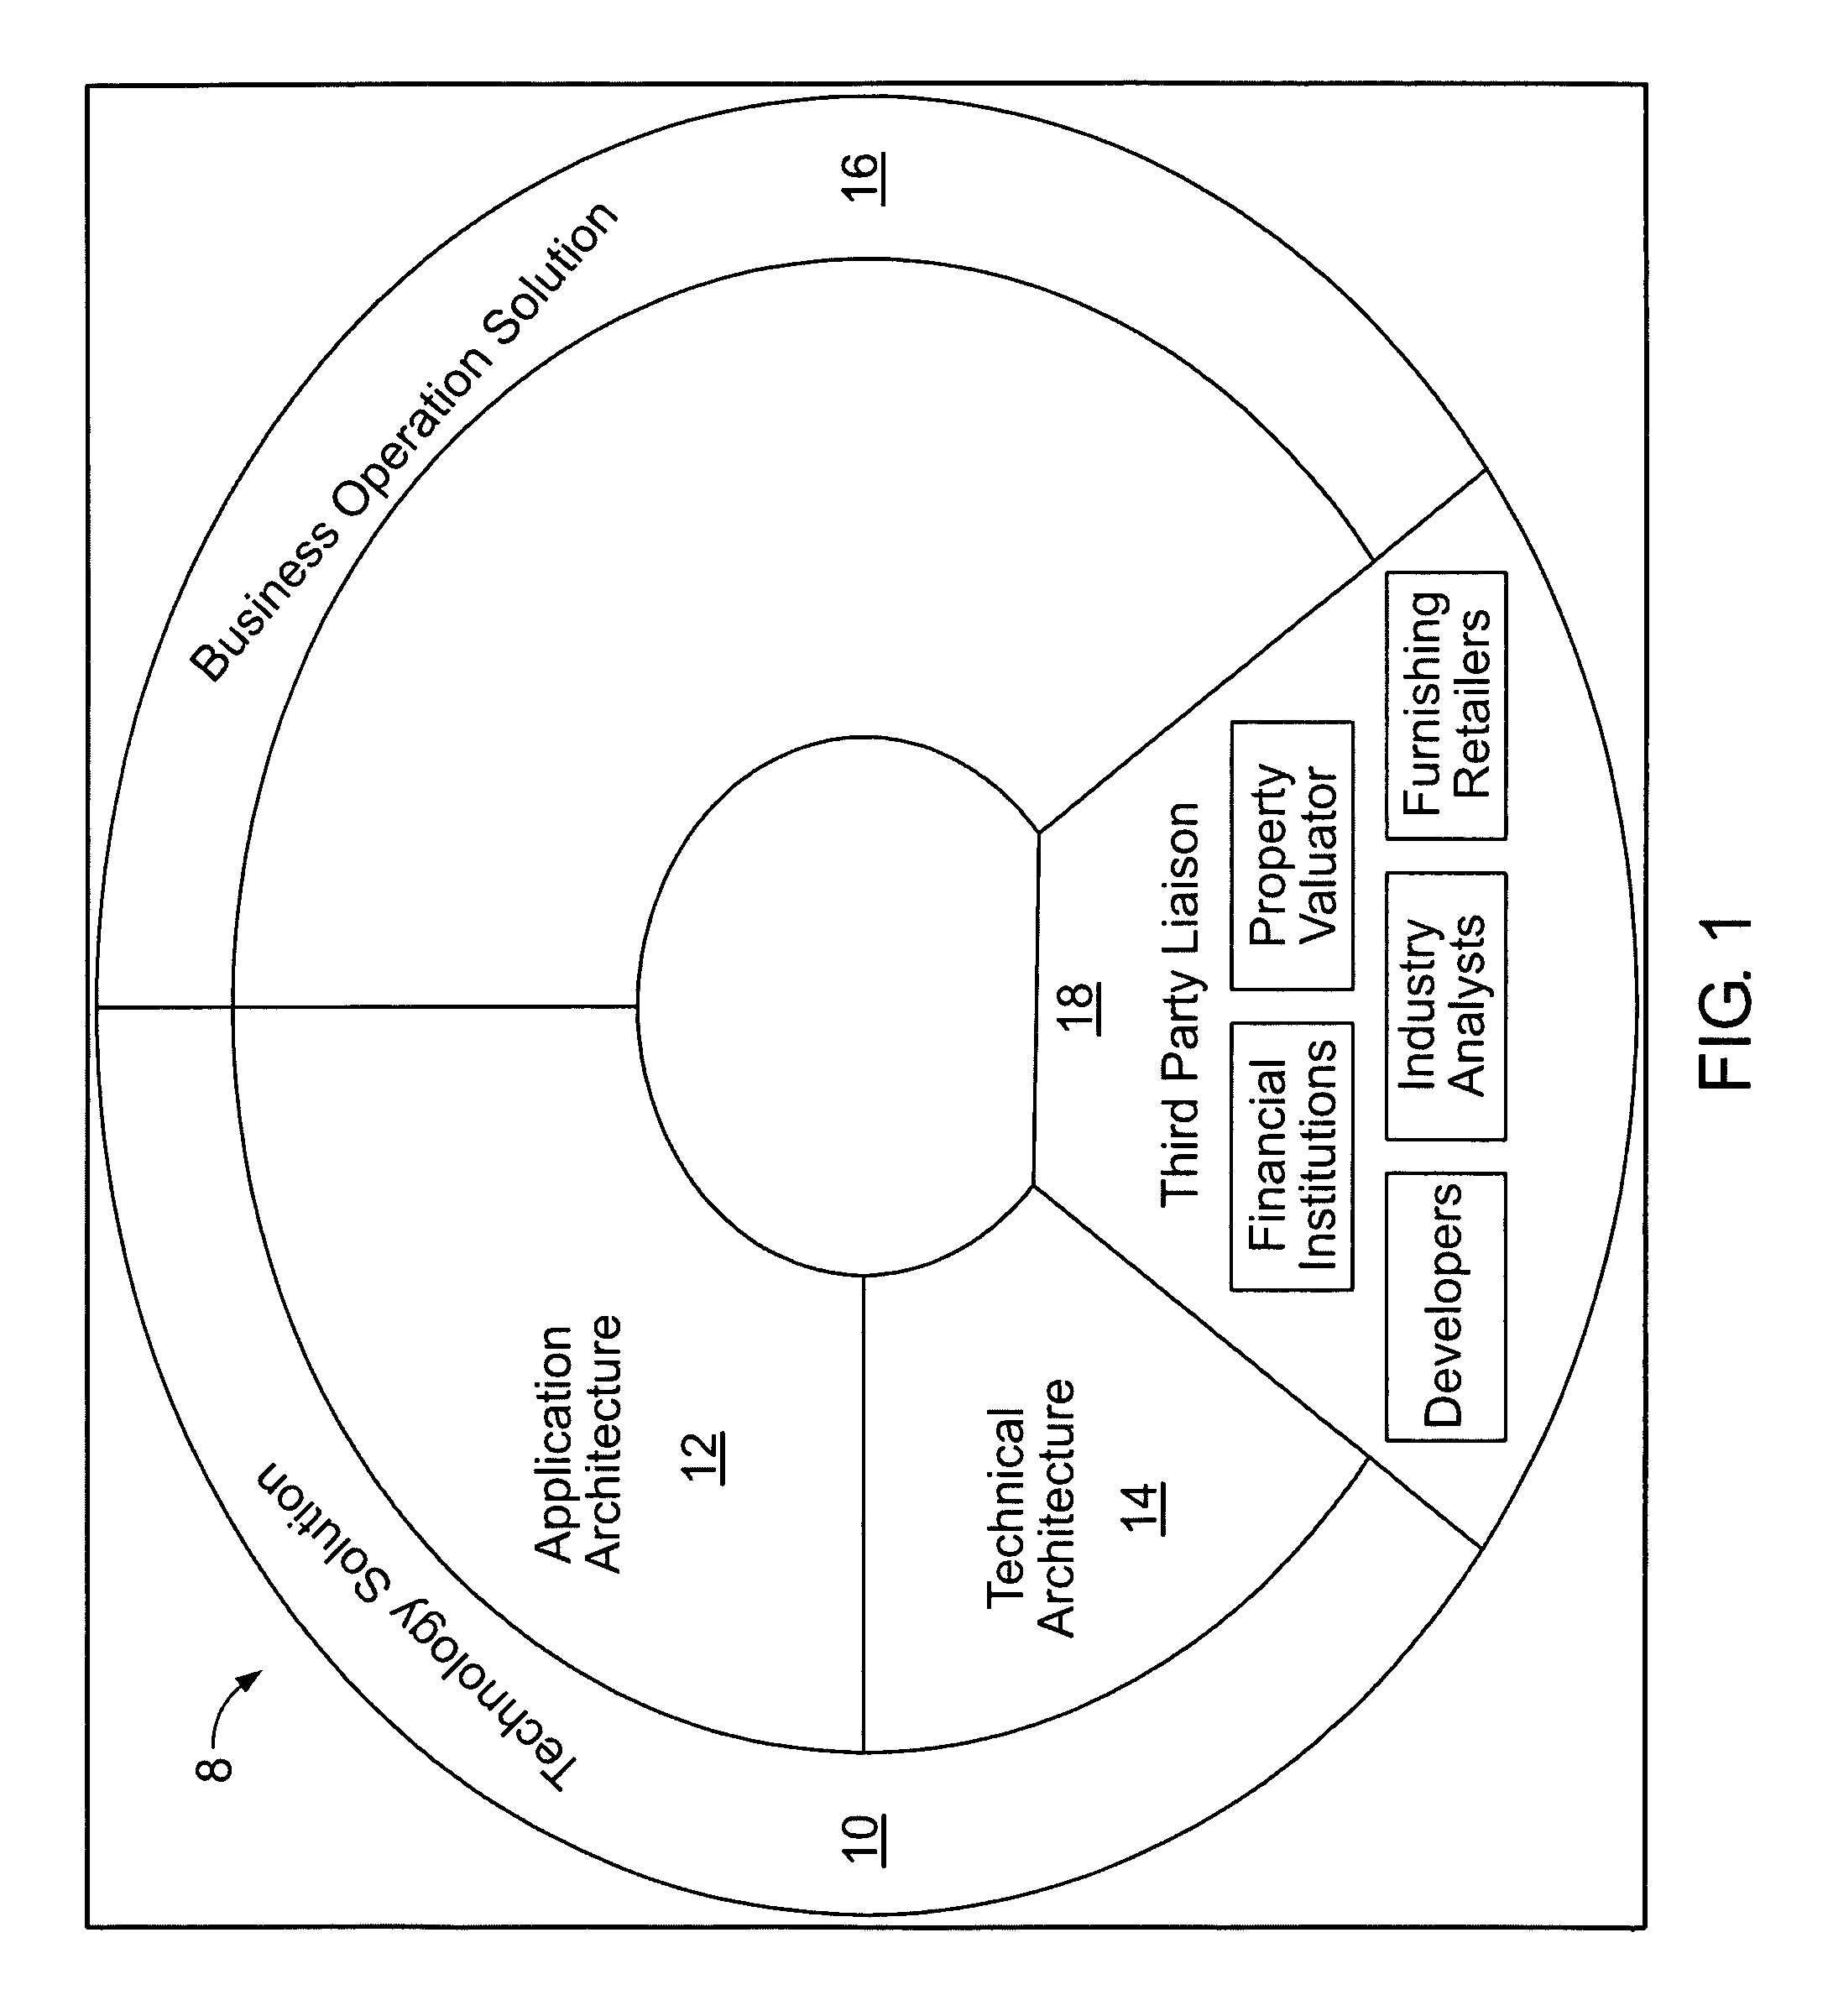 System and method for assisting the buying and selling of property